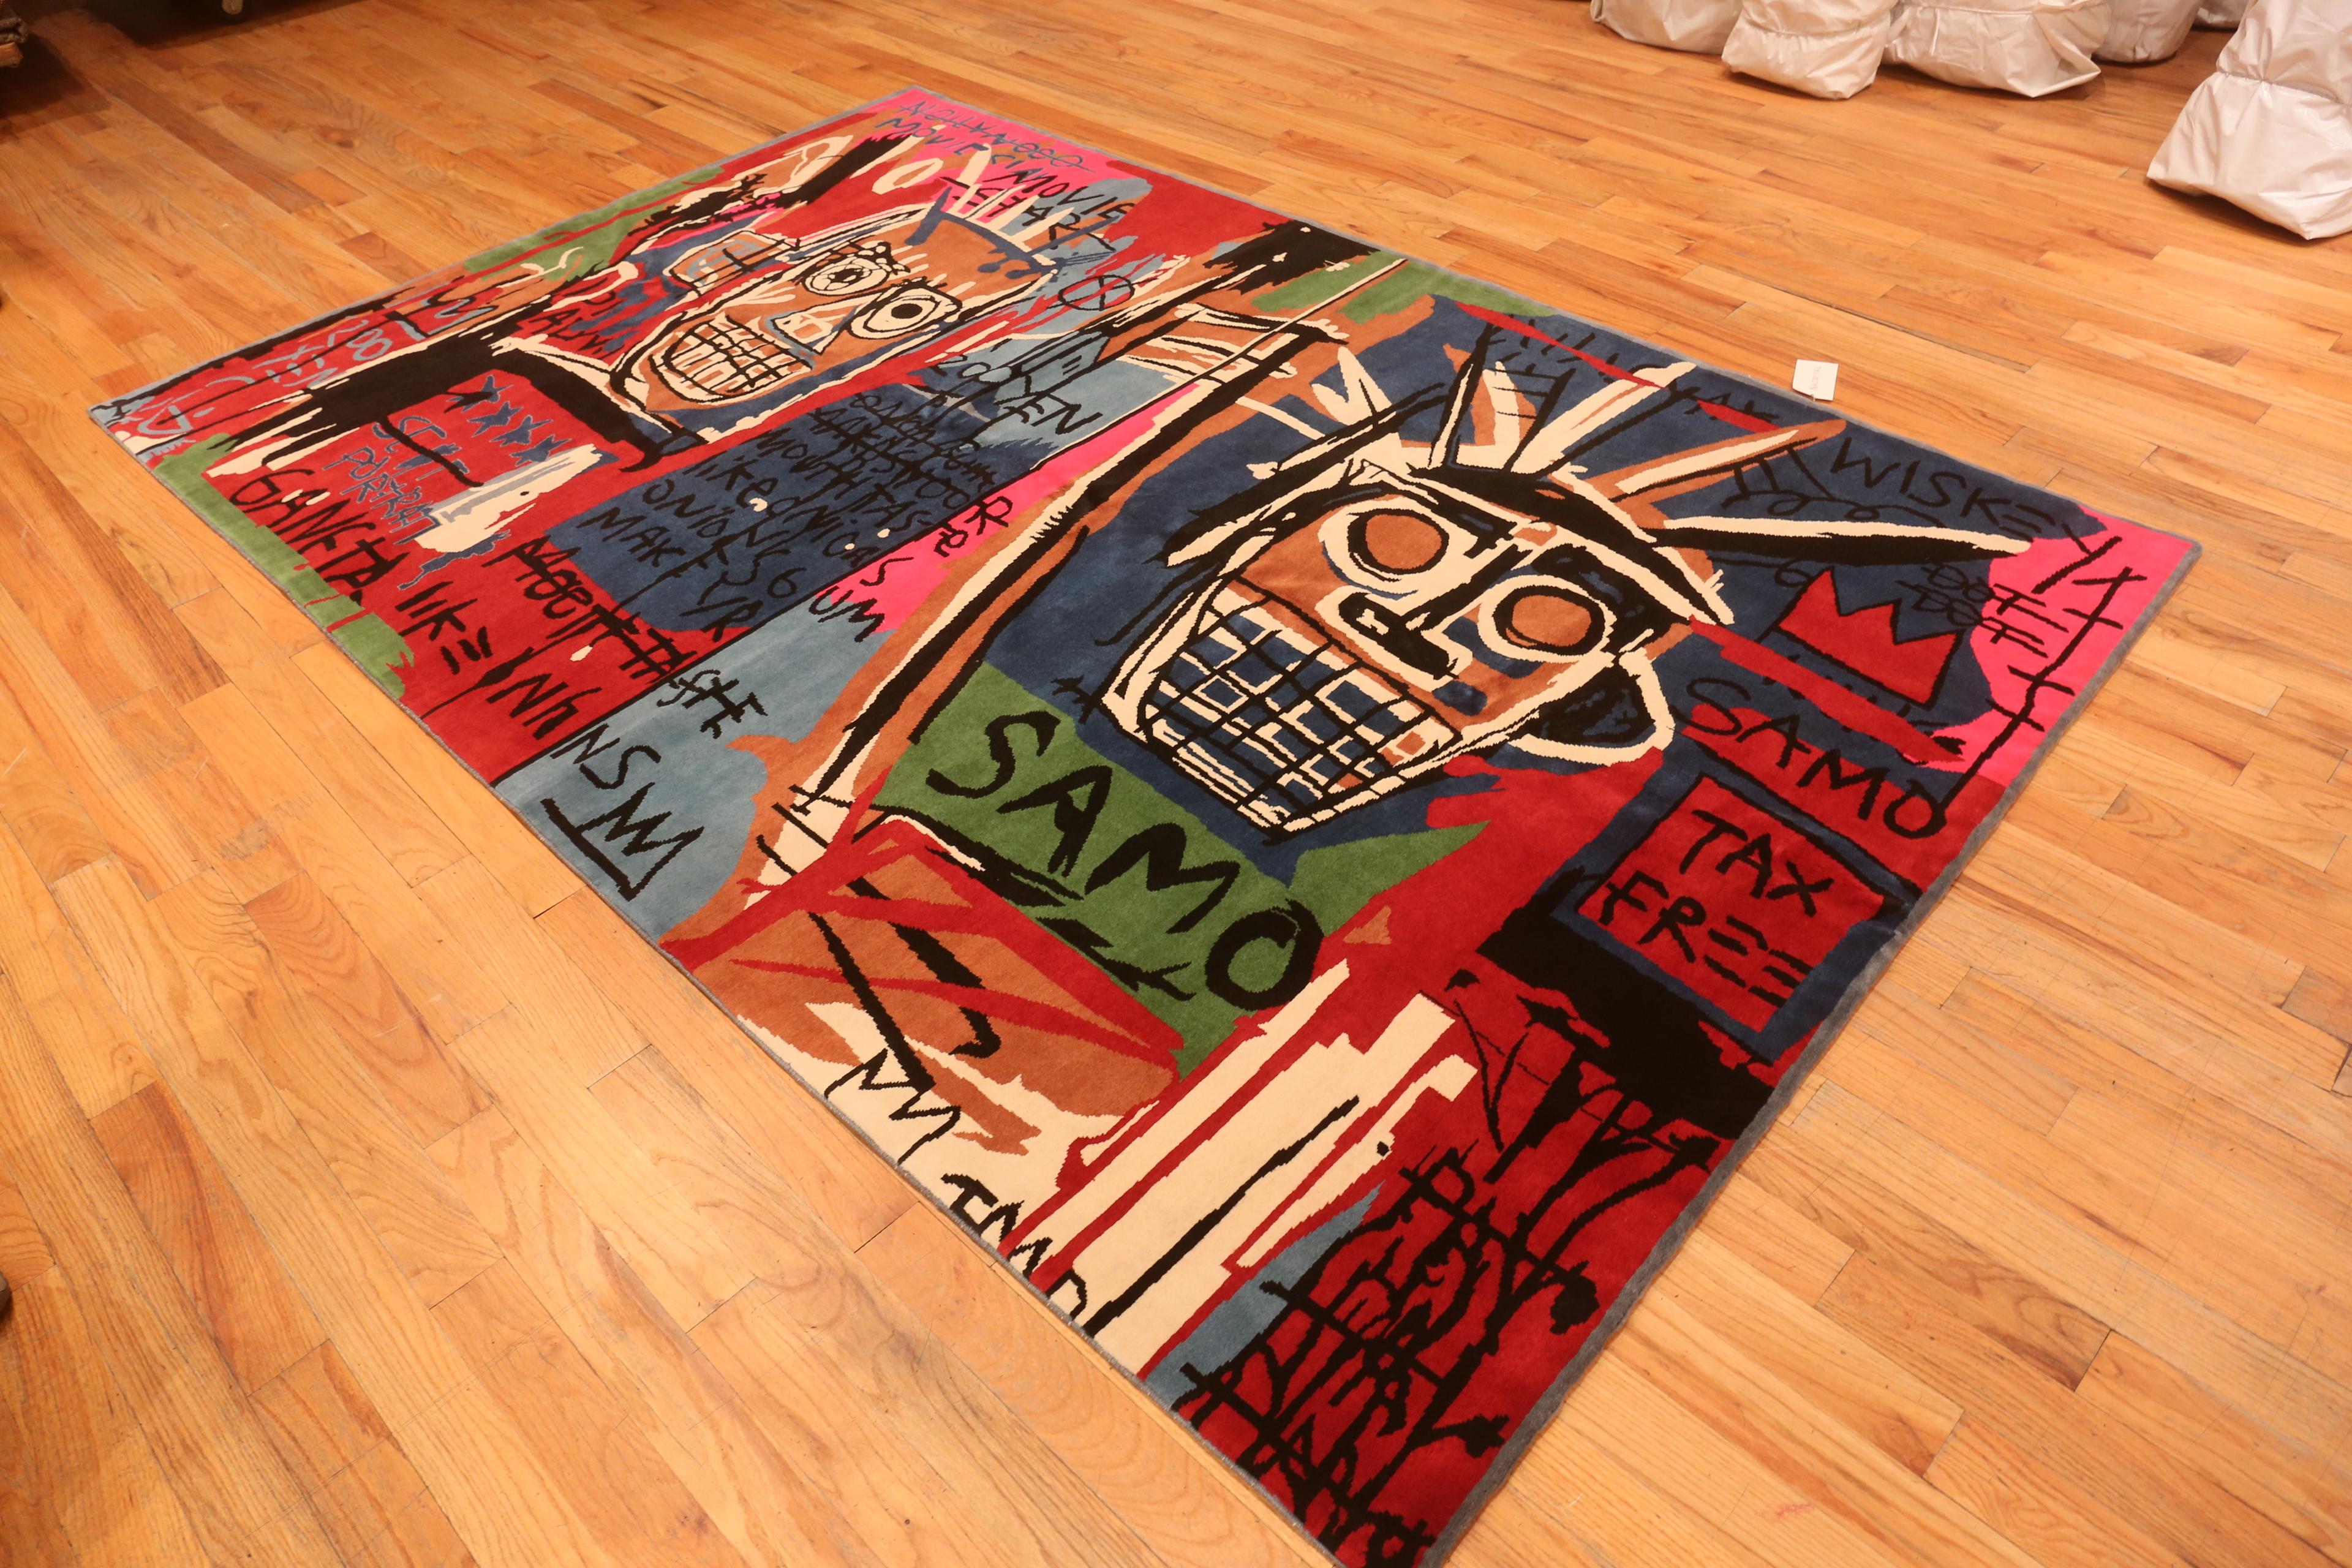 Contemporary Colorful Modern Basquiat Inspired Art Area Rug. 6 ft 6 in x 9 ft 9 in